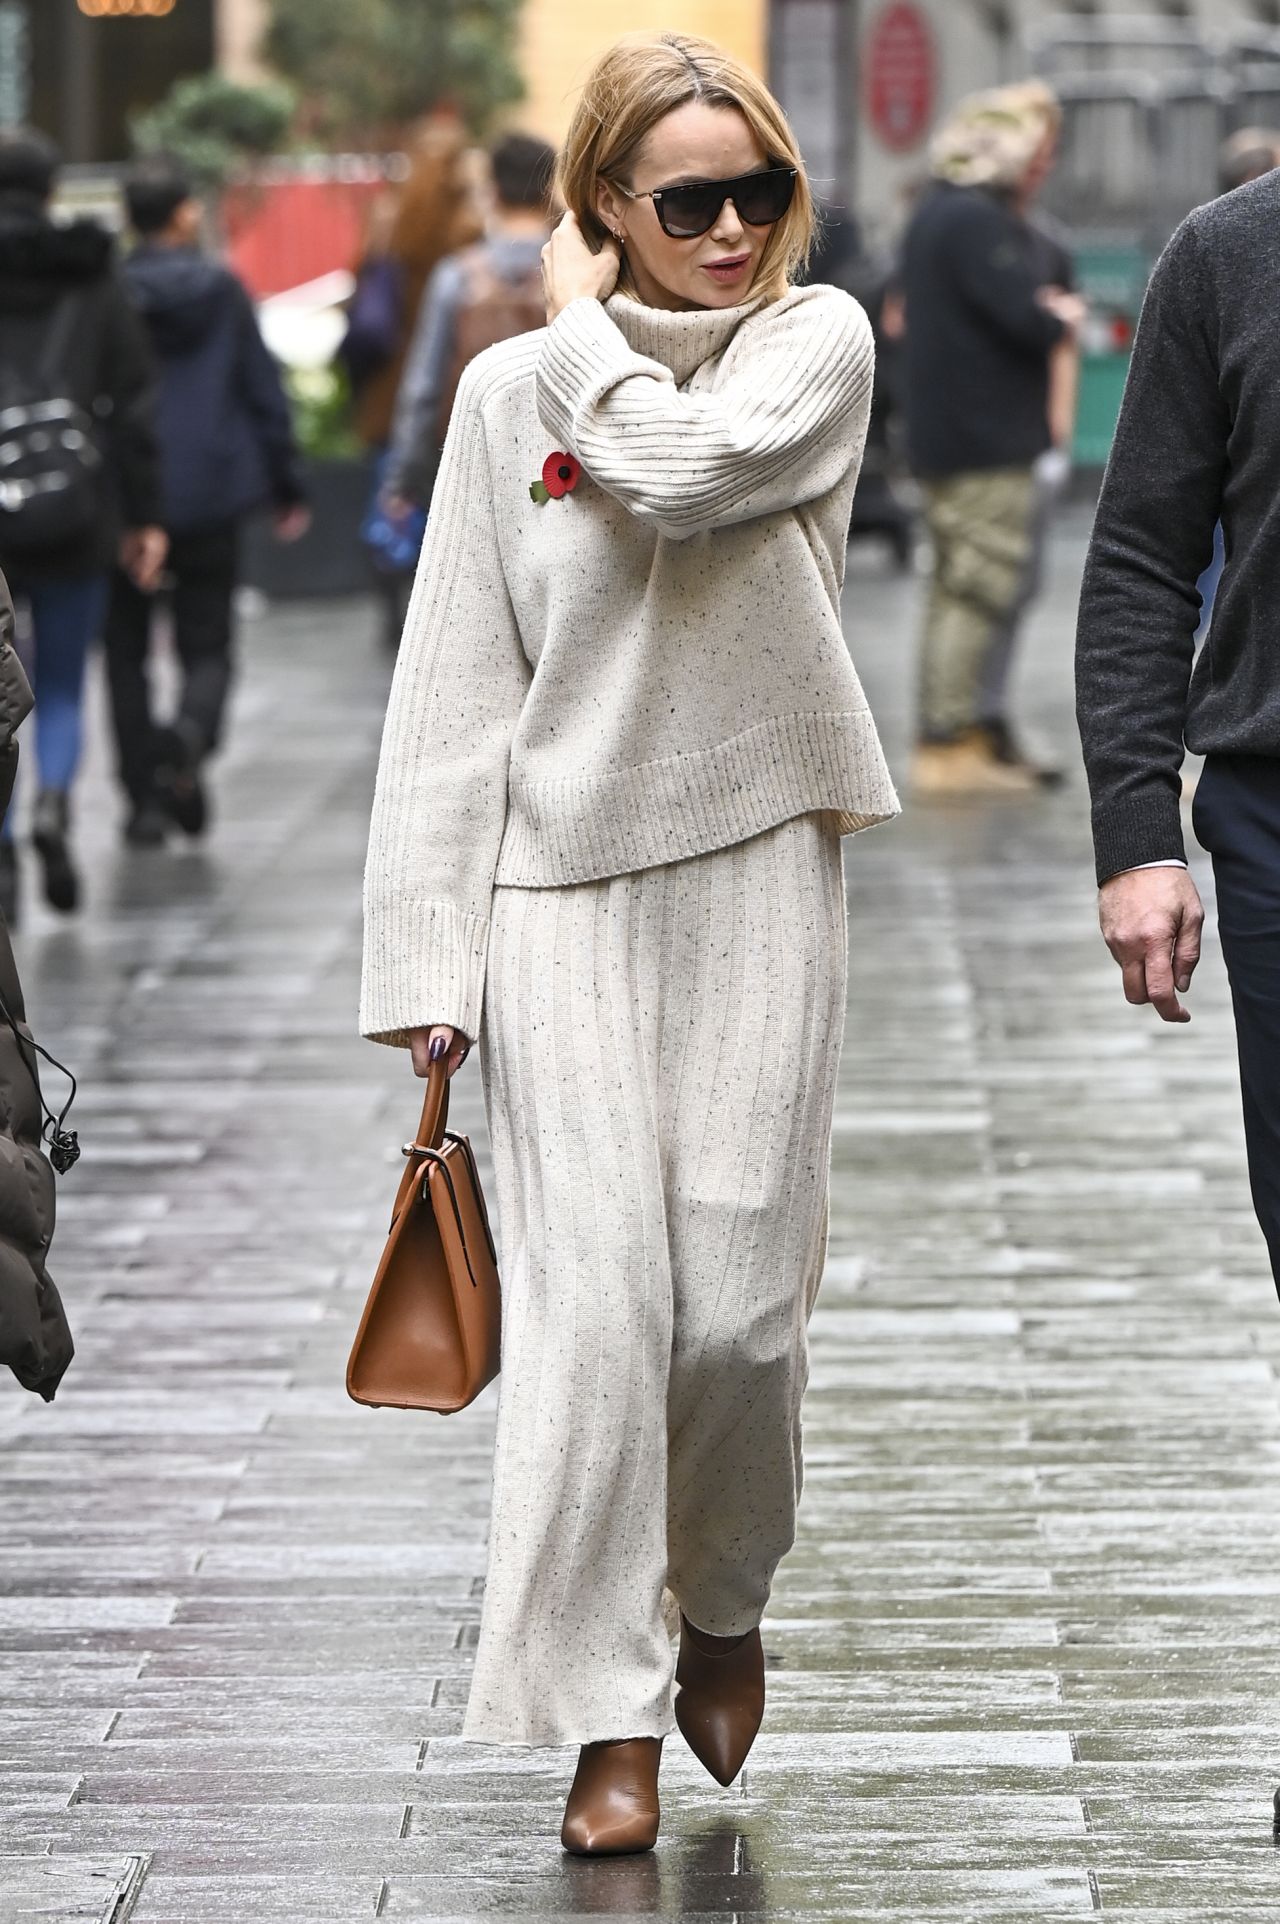 Amanda Holden in a Knitted Turtle Neck Cream Jumper and Maxi Skirt ...